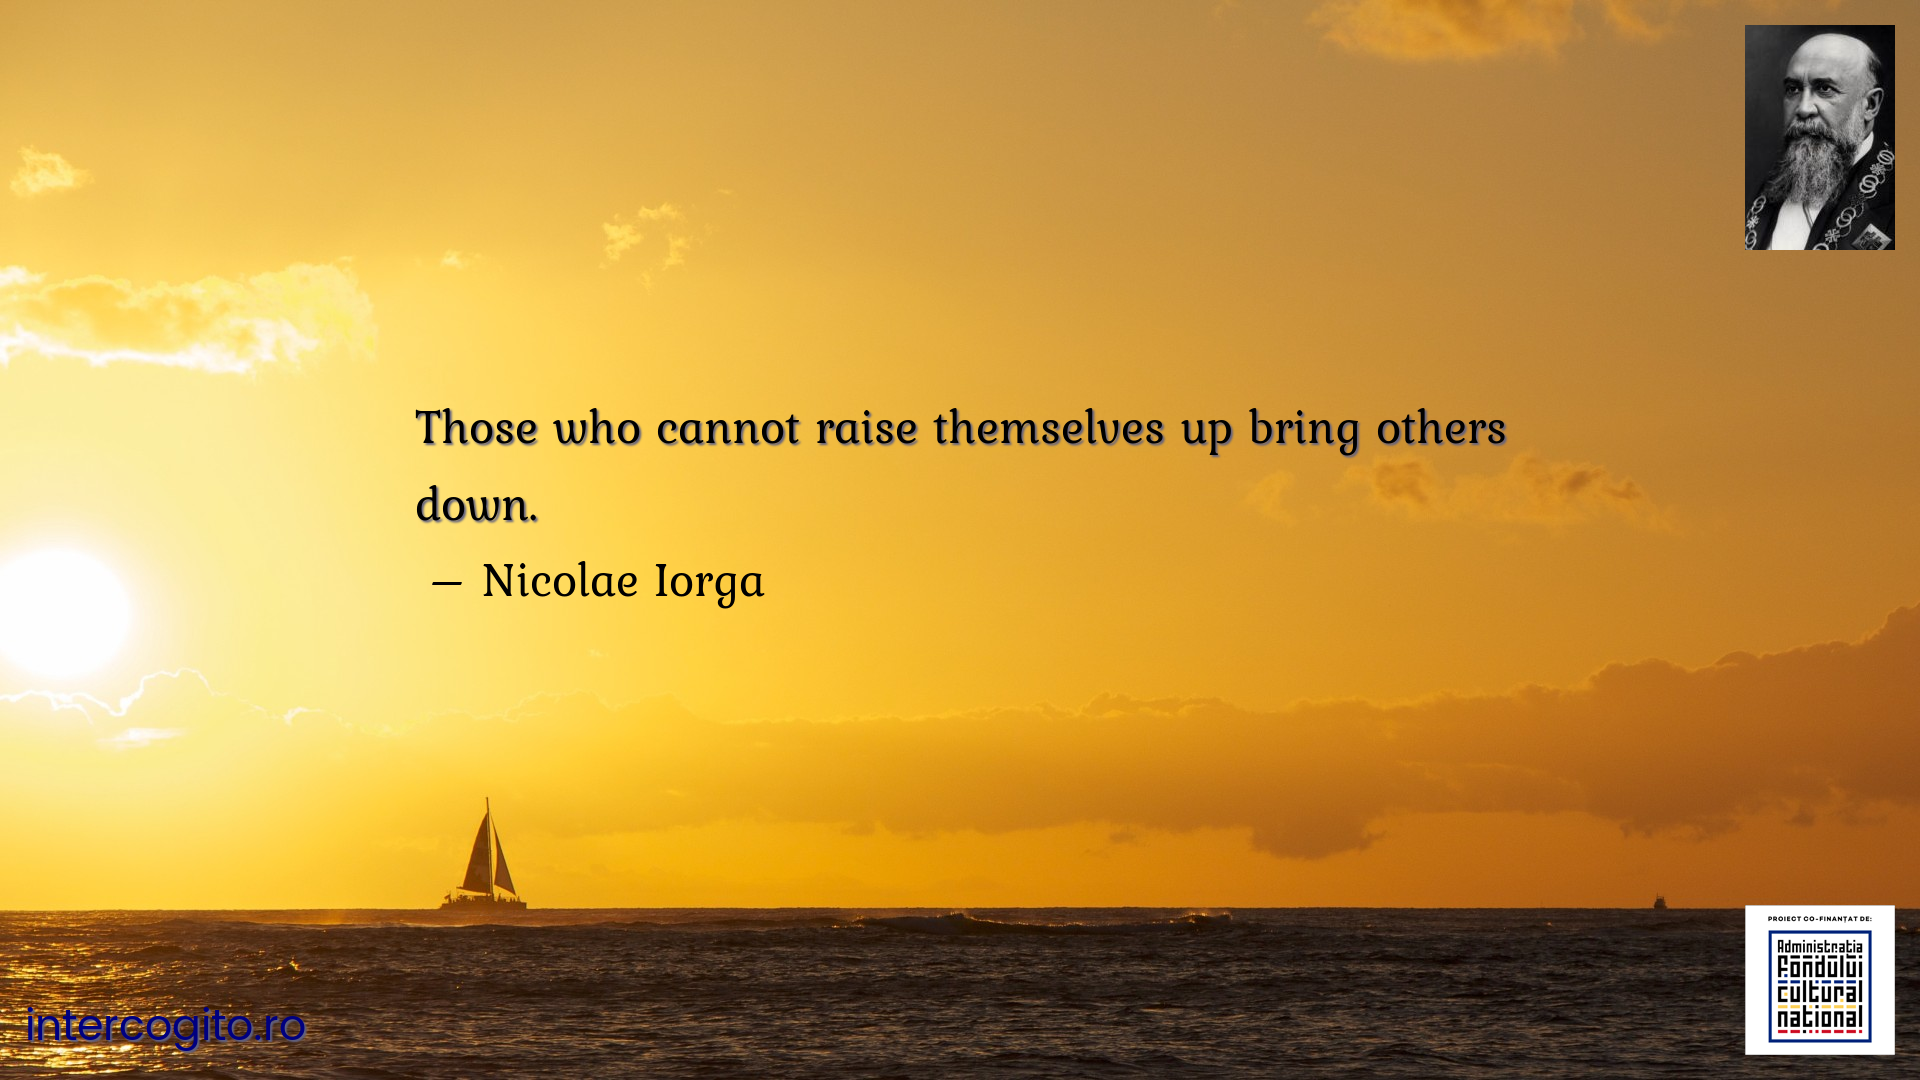 Those who cannot raise themselves up bring others down.